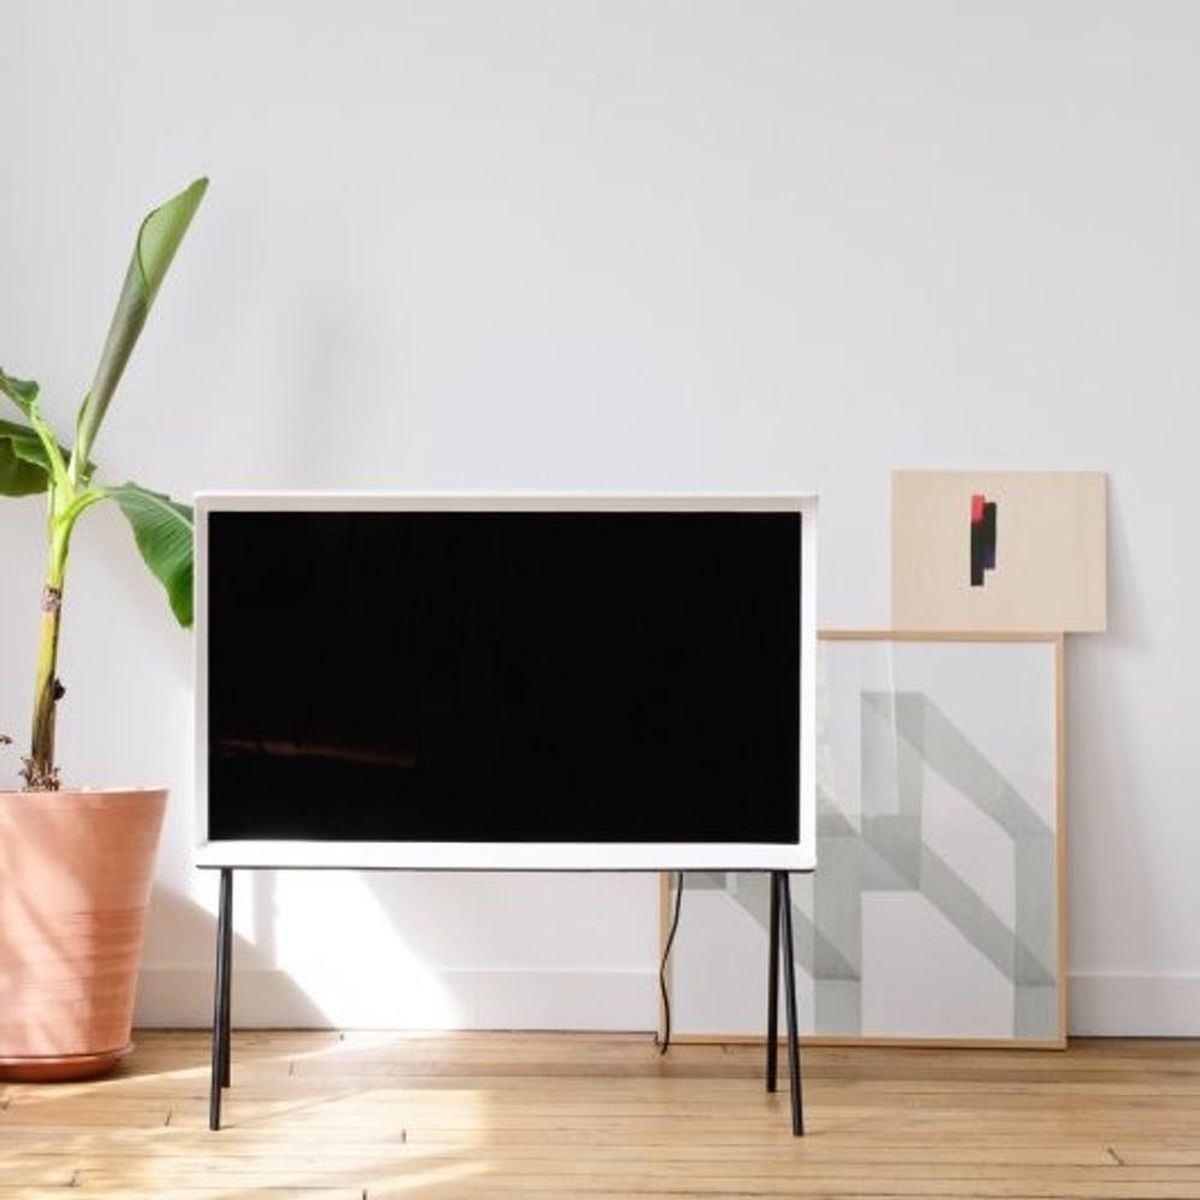 Samsung Has Created a TV More Beautiful Than Any Furniture You Own